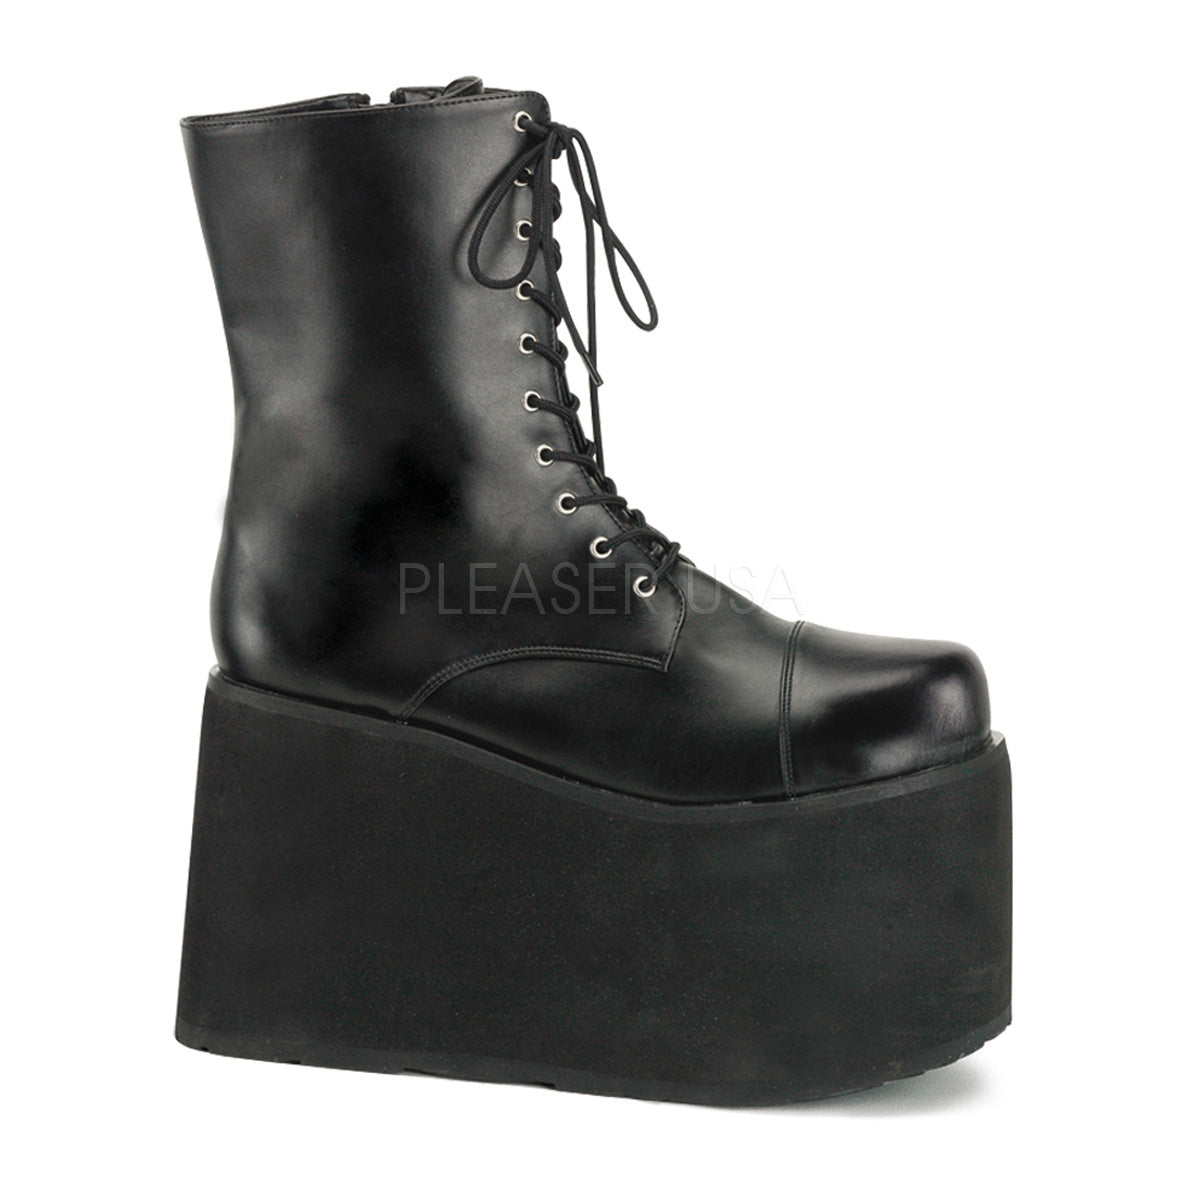 5 inch wedge boots